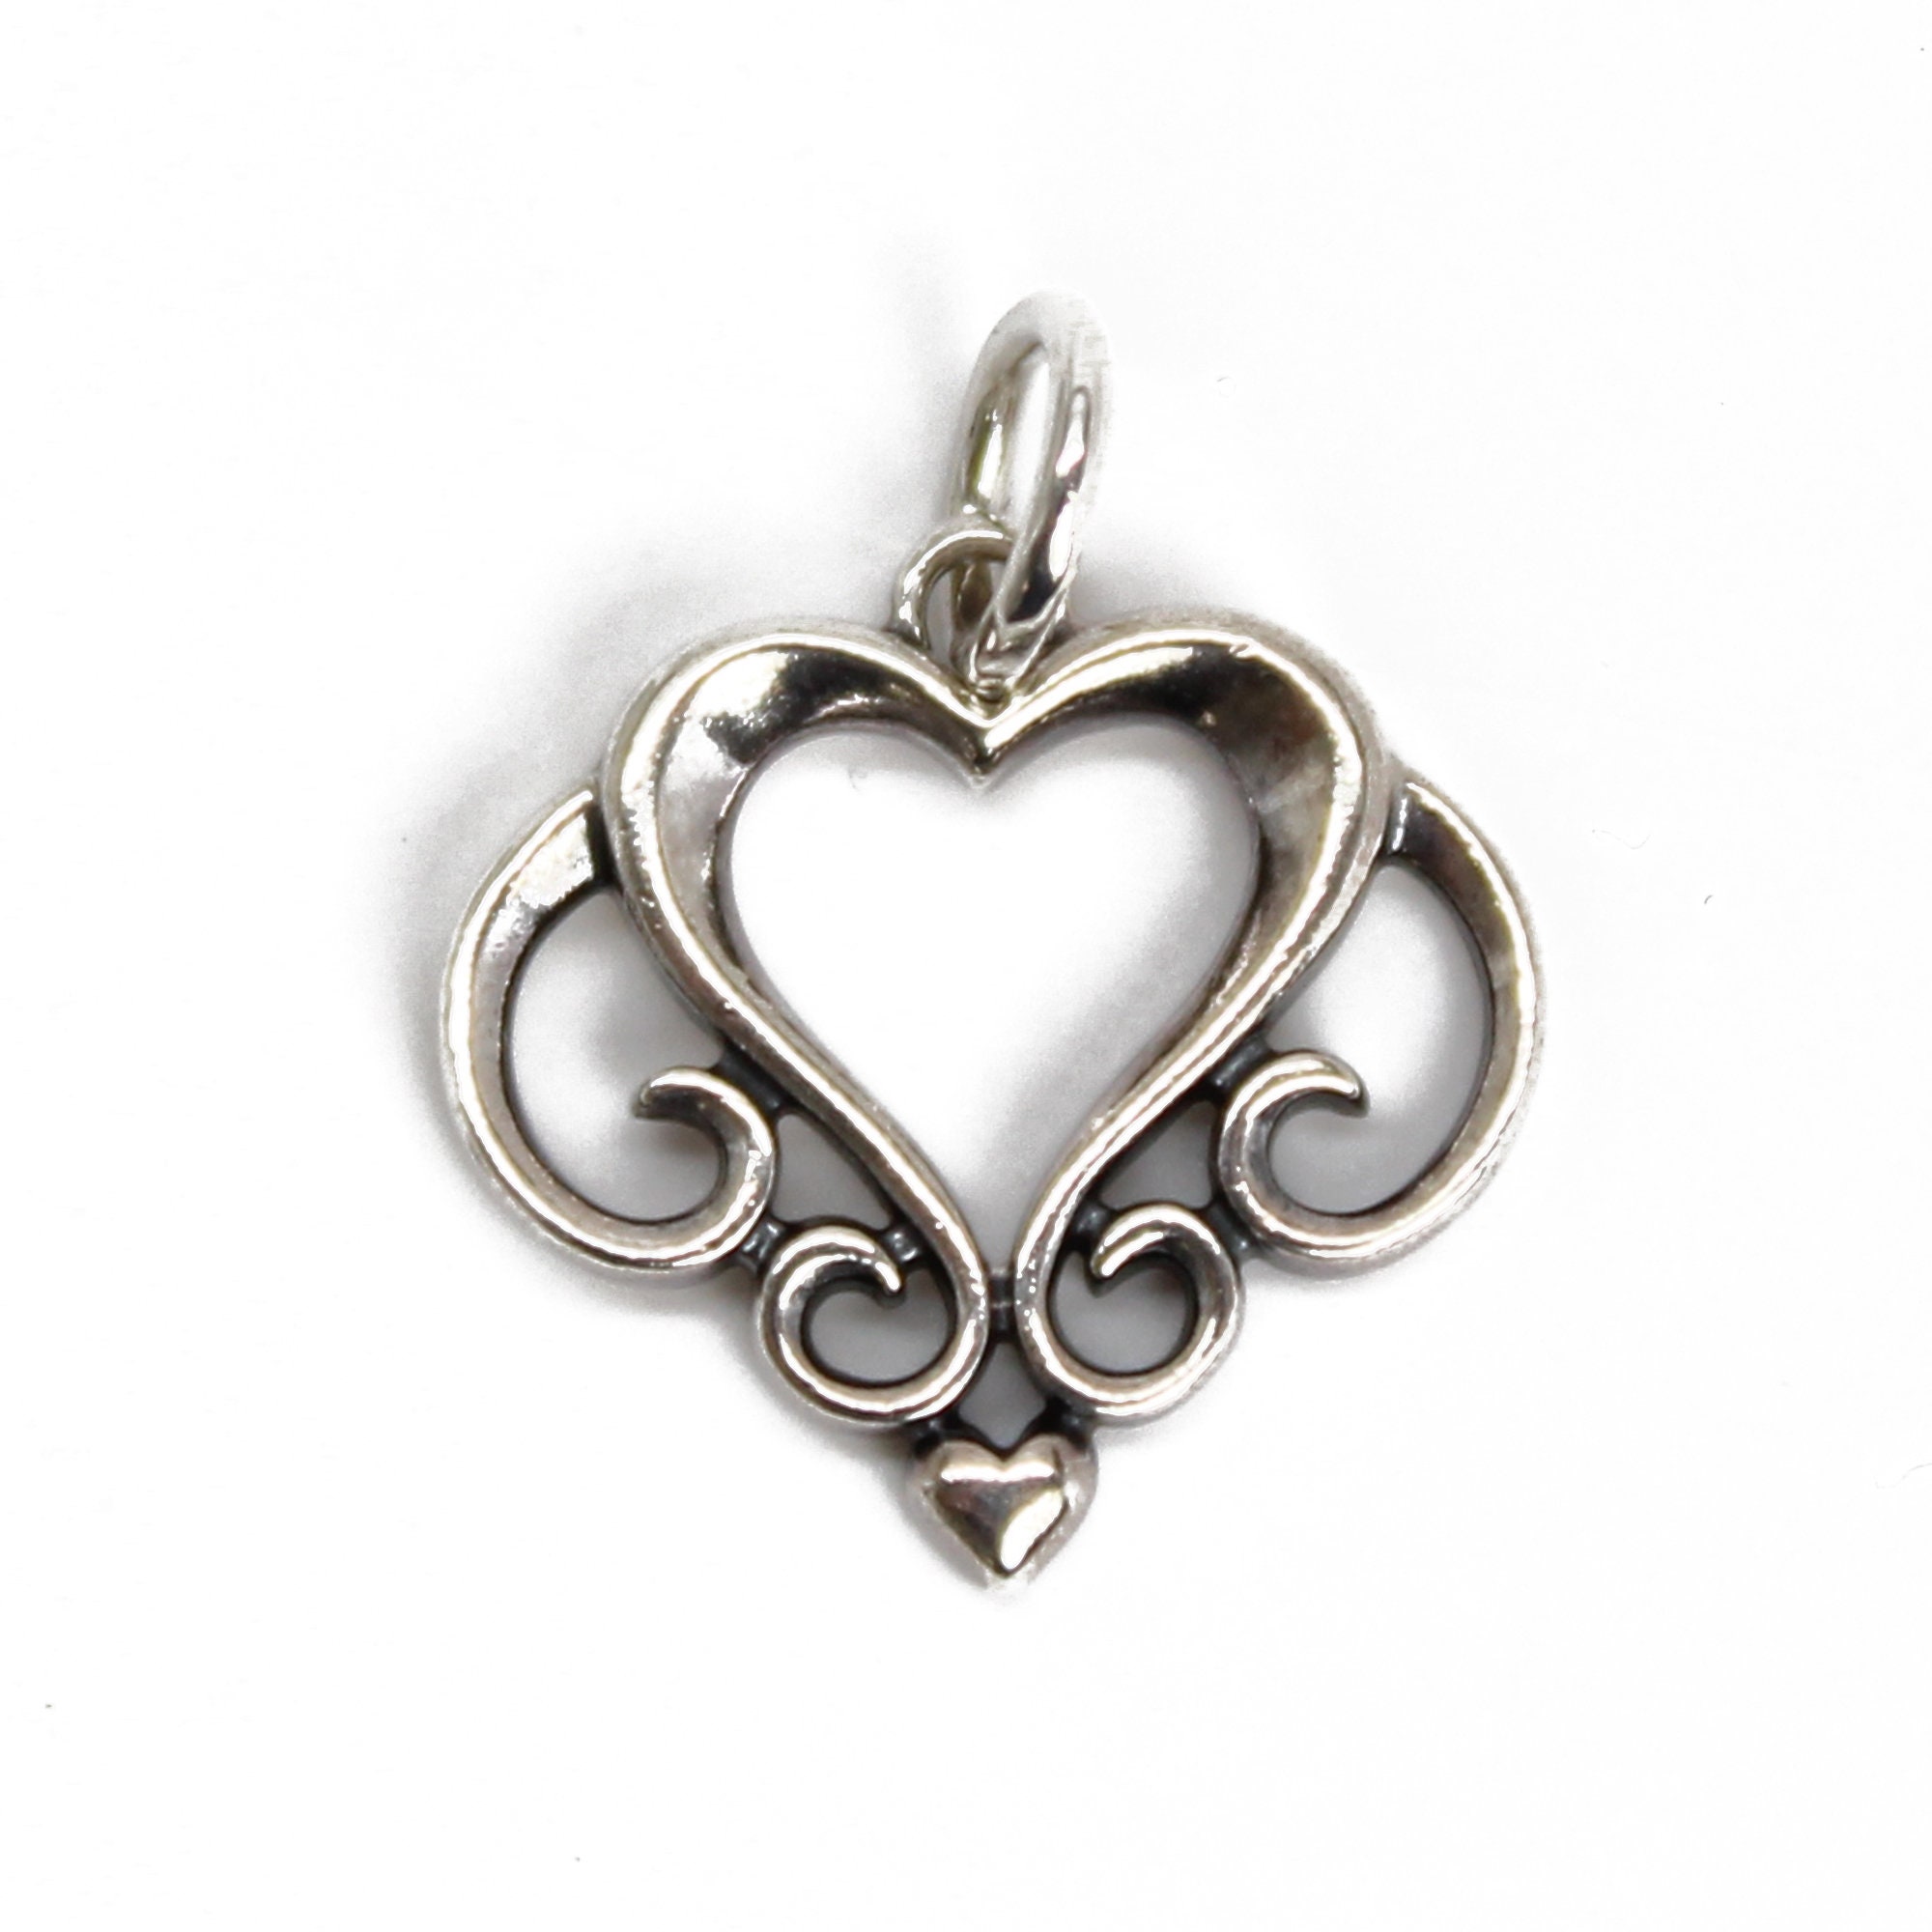 James Avery Artisan Jewelry - Charms from the heart make sweet